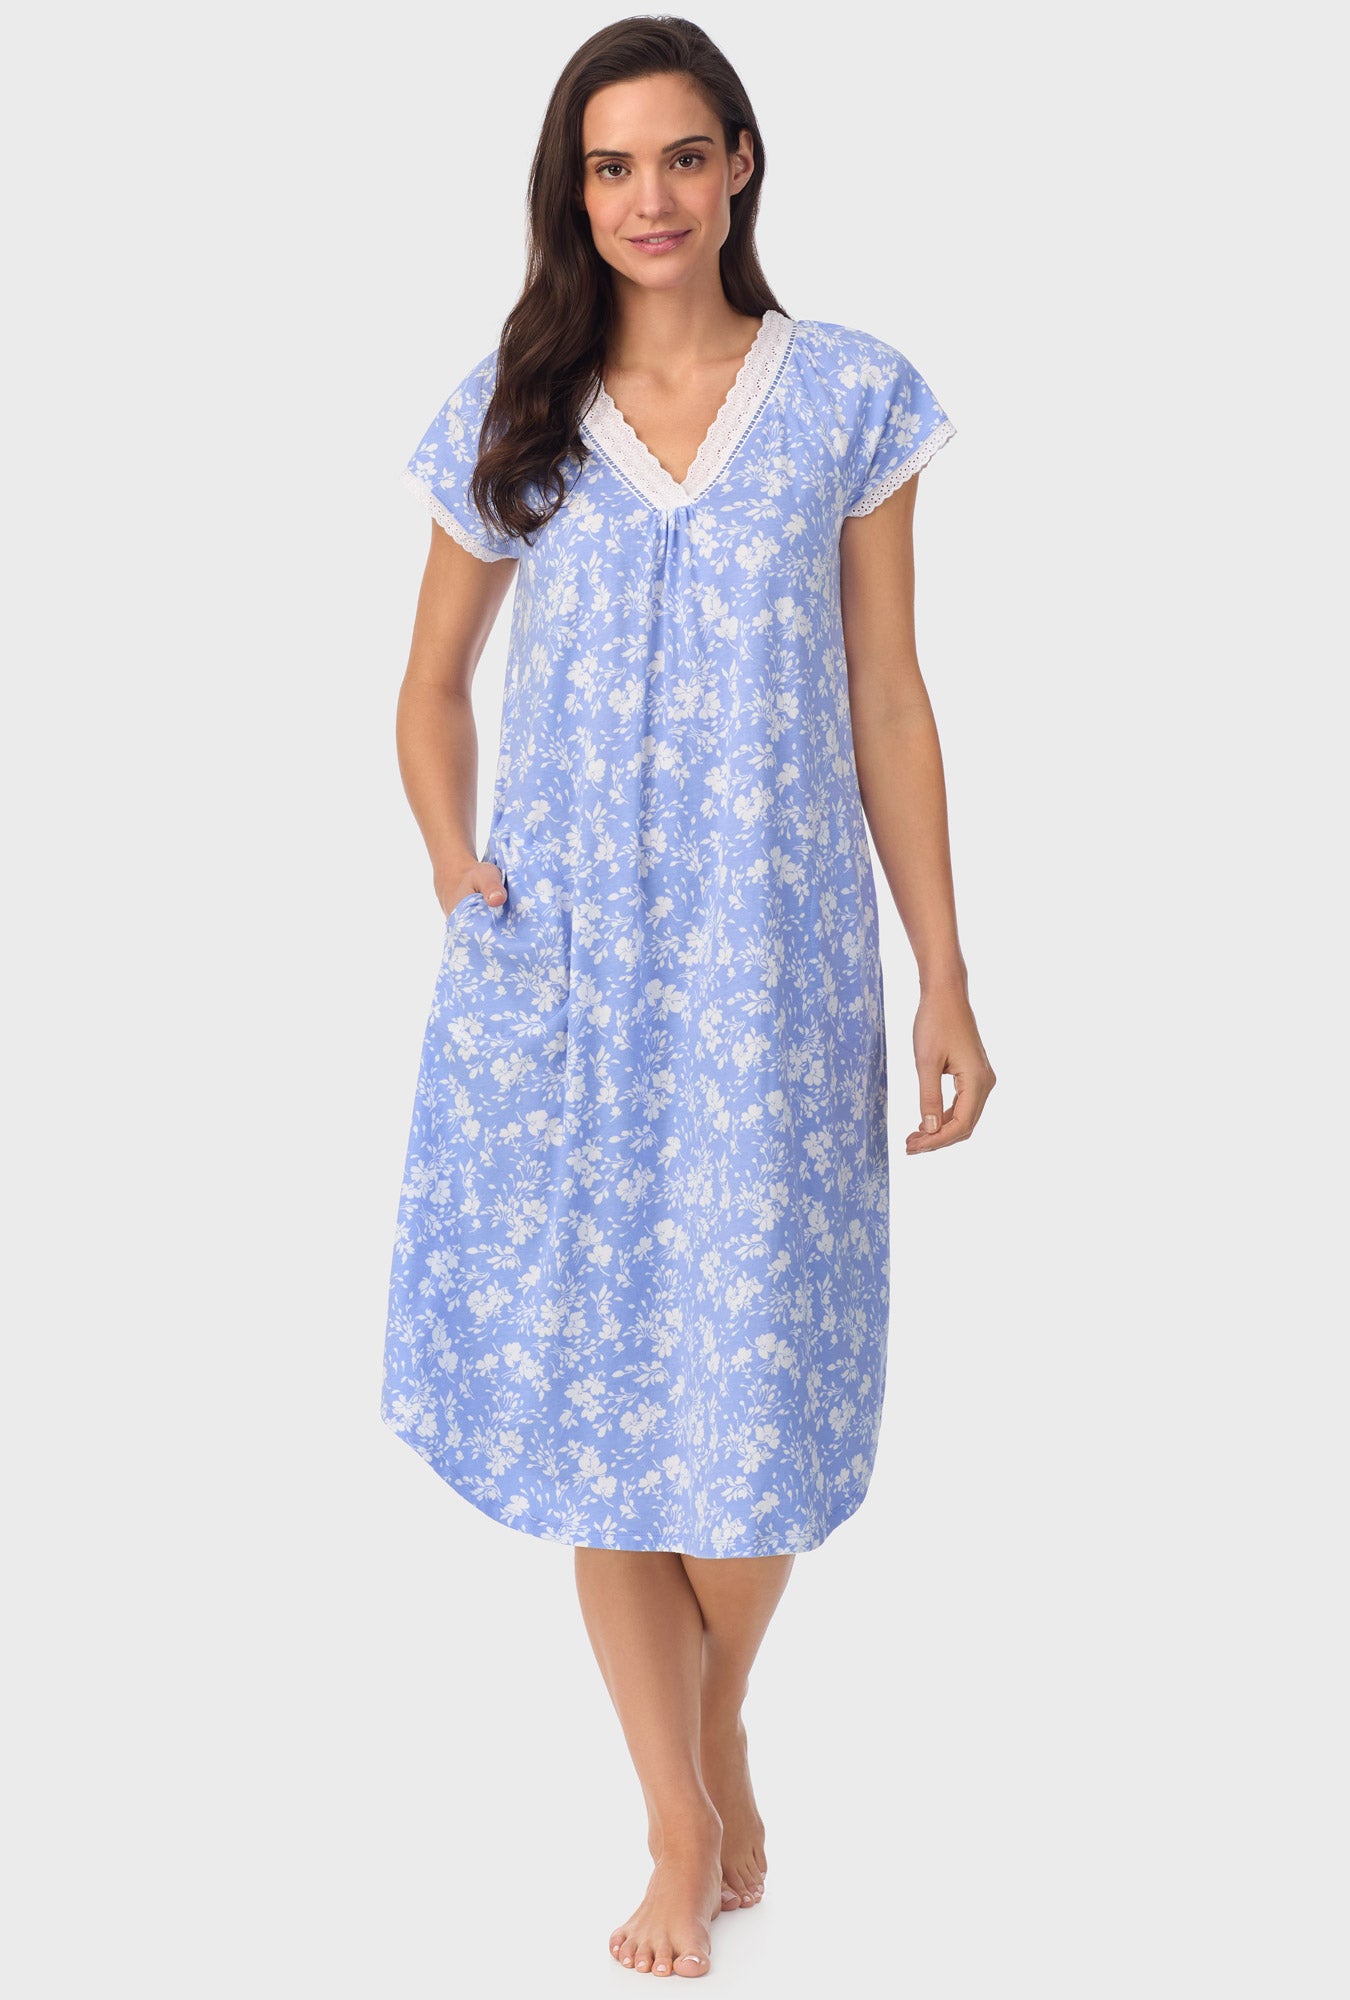 A lady wearing blue short Sleeve Floral Cap Sleeve Nightgown  with Powder Blue print